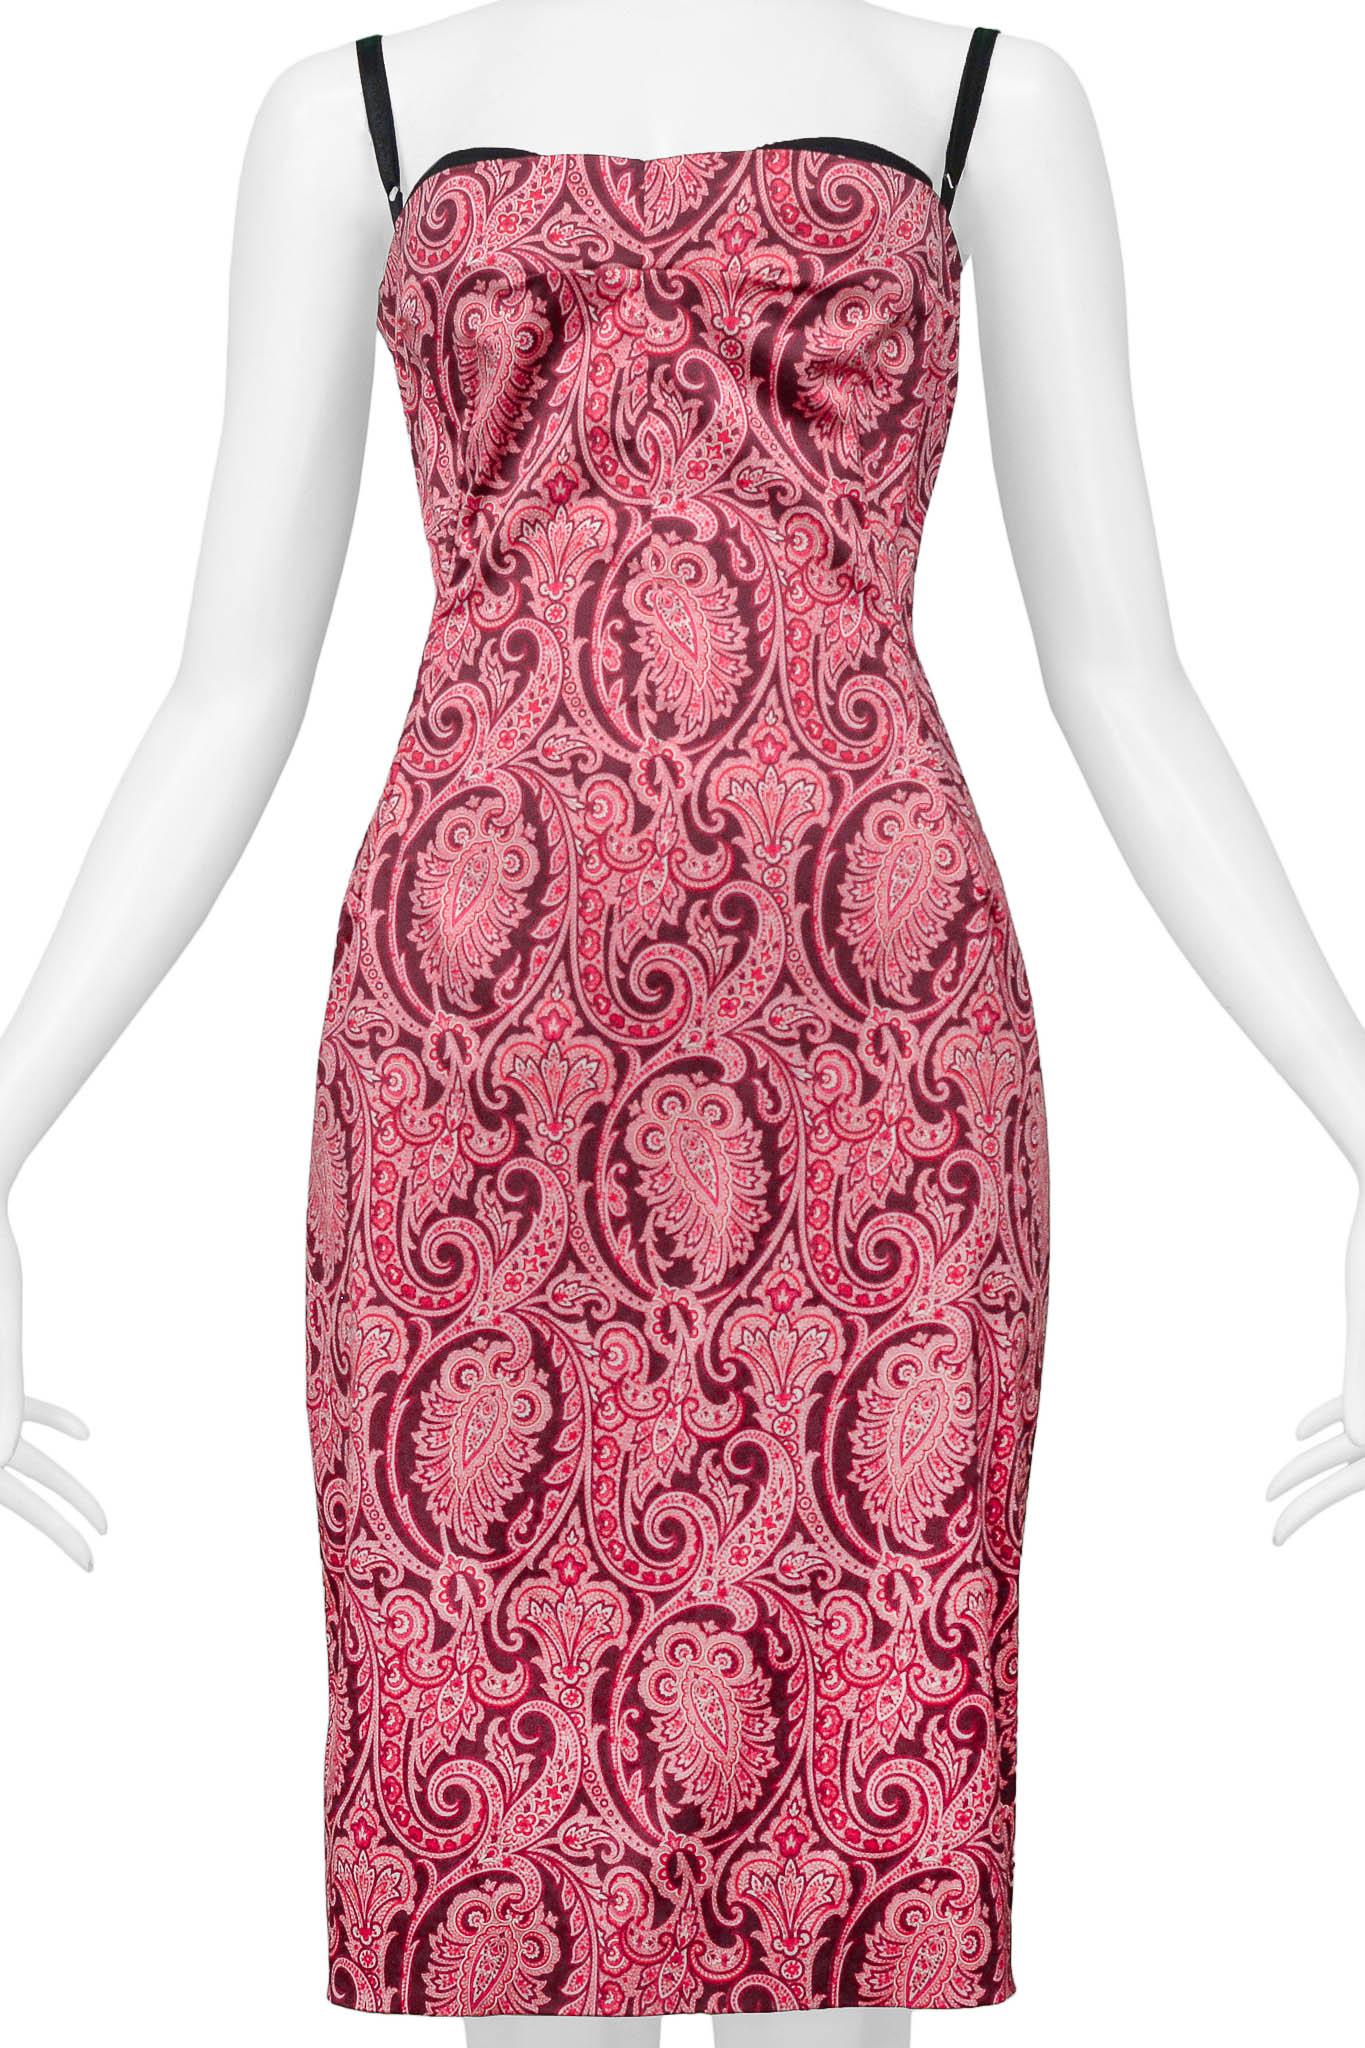 Dolce & Gabbana Pink Paisley Body-Con Dress In Excellent Condition For Sale In Los Angeles, CA